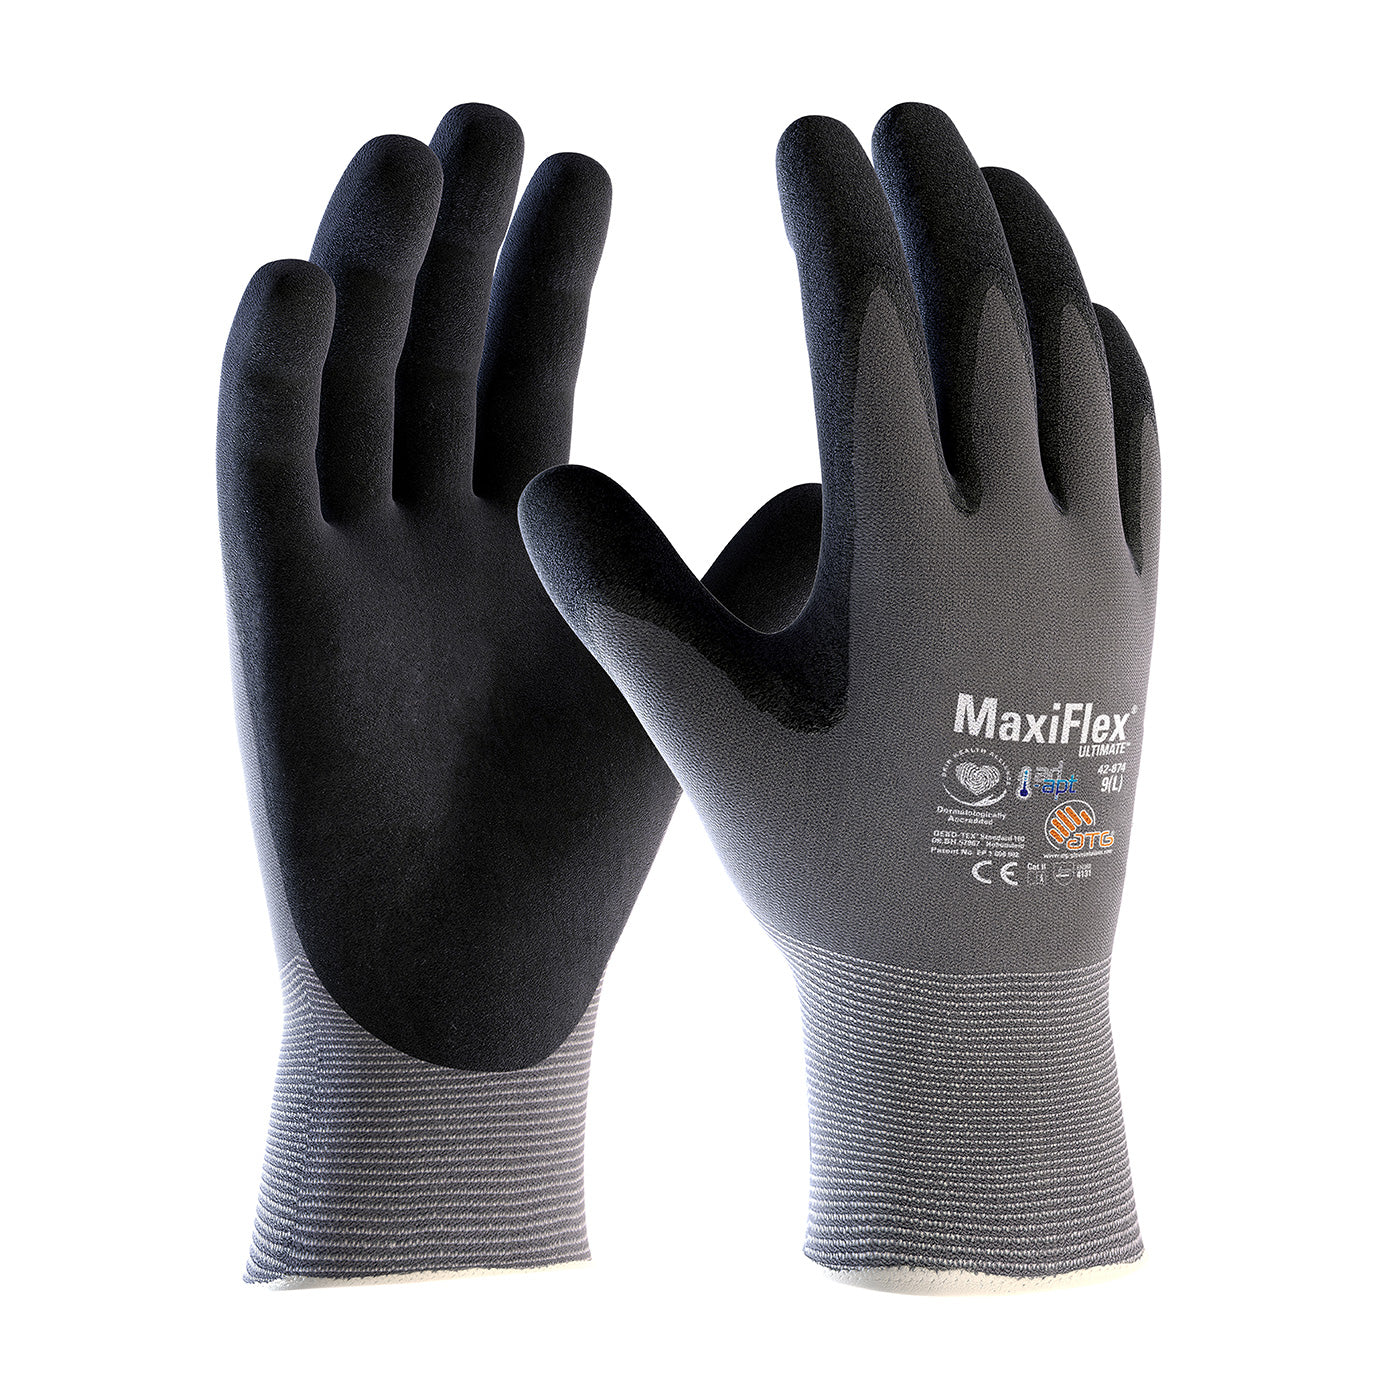 Seamless Knit Nylon / Elastane Glove with Nitrile Coated MicroFoam Grip on Palm & Fingers and AD-APT™ Technology - Touchscreen Compatible-eSafety Supplies, Inc